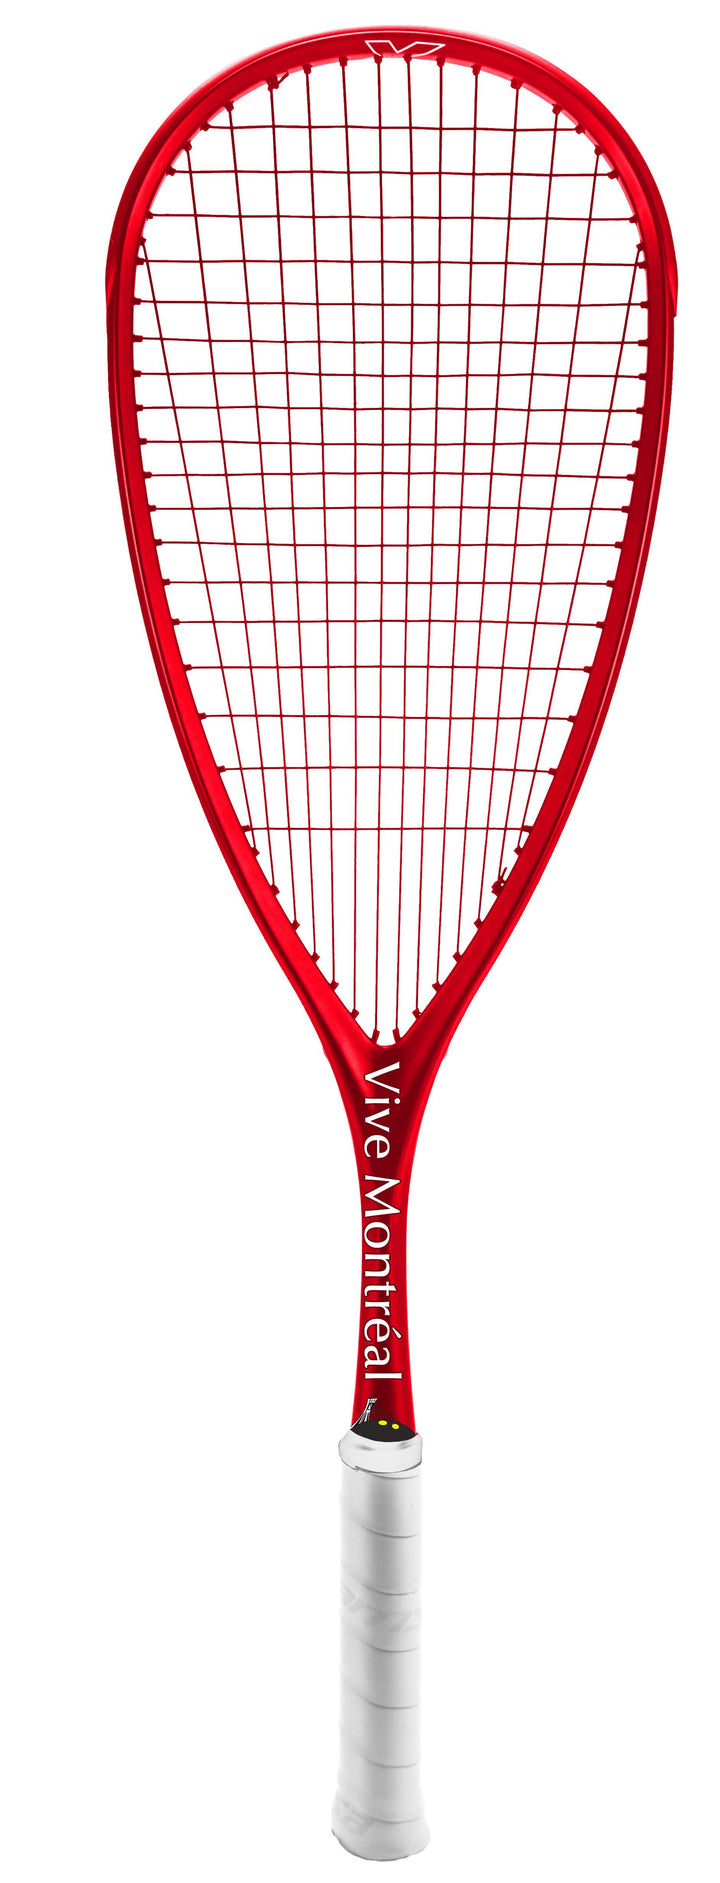 Xamsa Onyx - Vive Montreal - Limited Edition Squash Racquet with Top Bumper Squash Racquets Xamsa Strung with Xamsa PM18 Red with Canada Stencil 